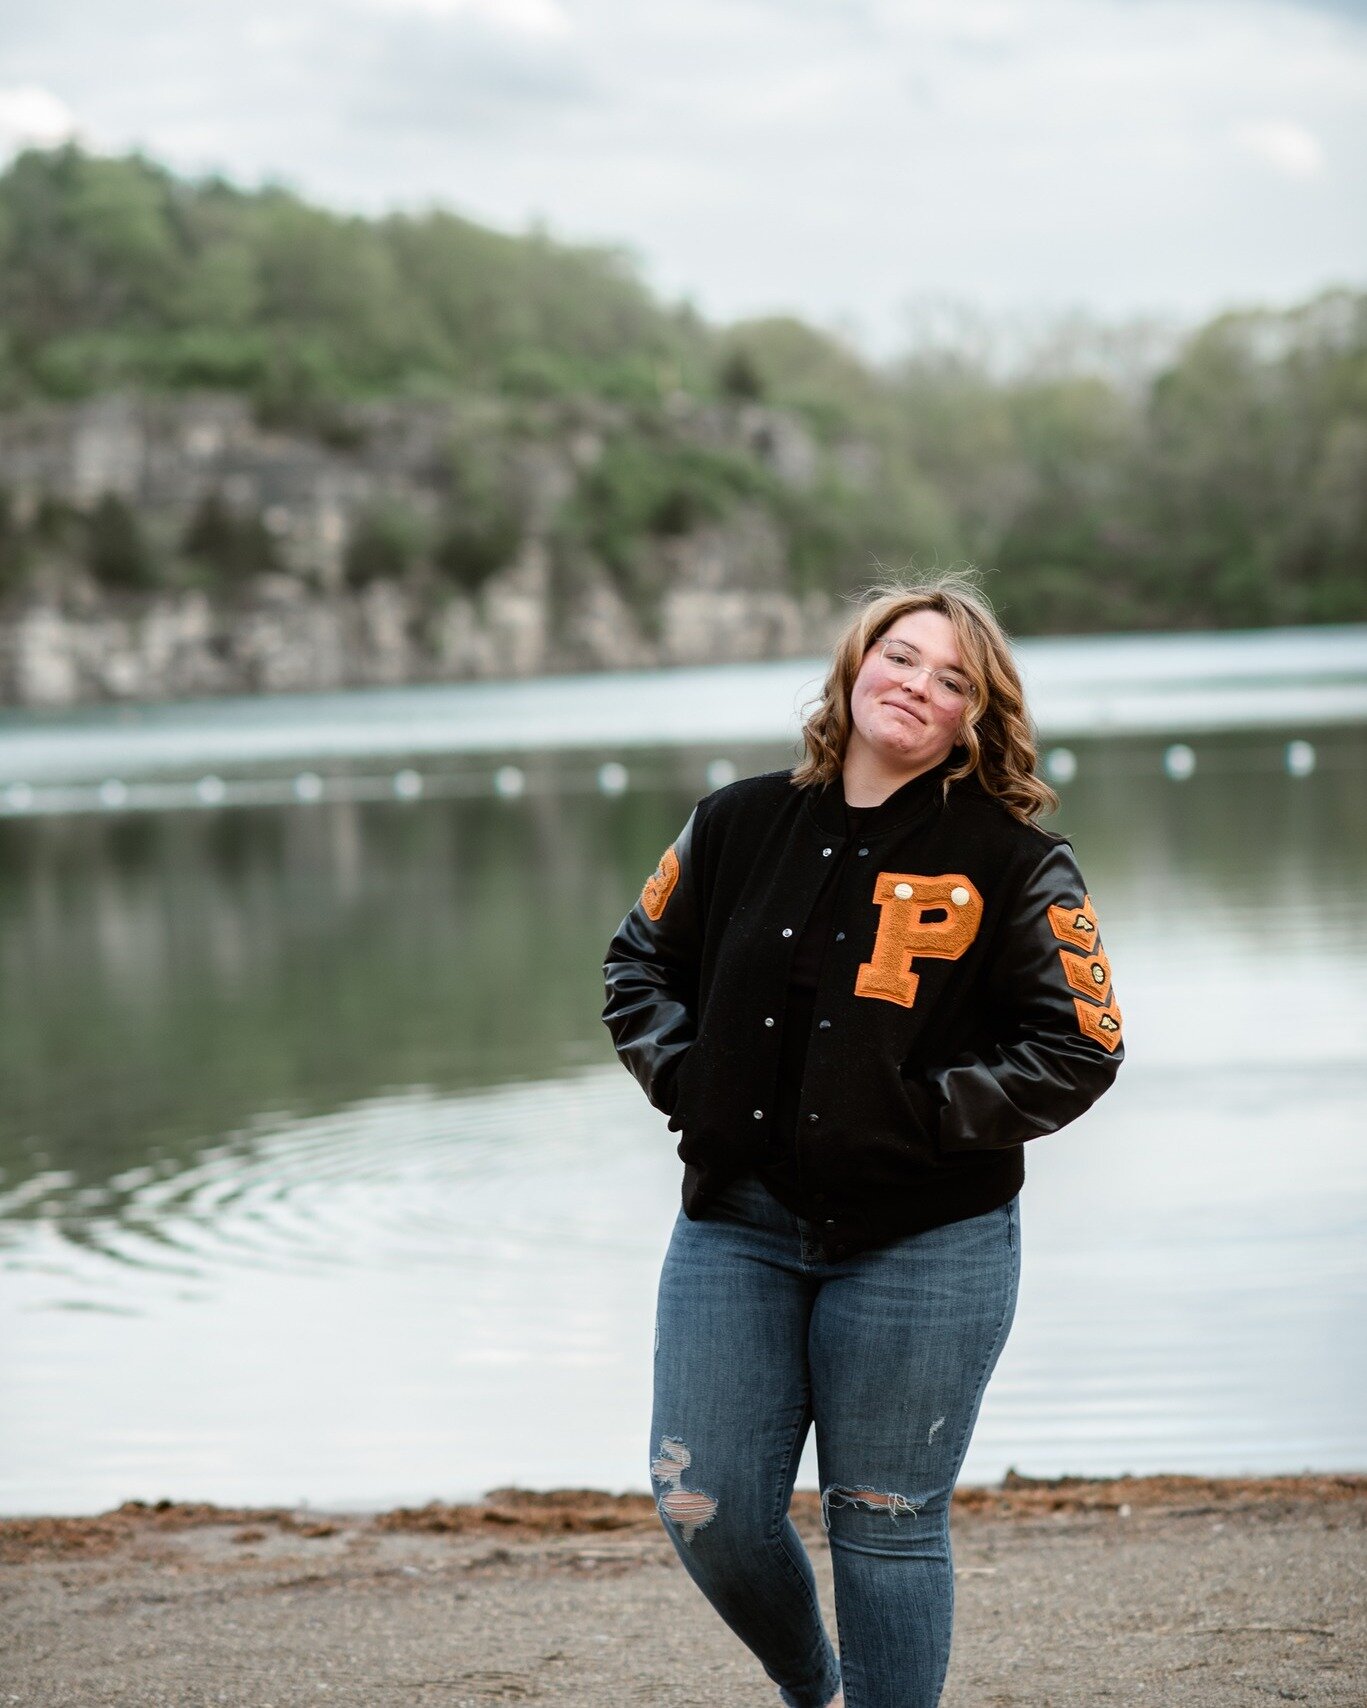 SENIOR SPOTLIGHT: Brylee
What can I say about this beautiful Girl. She Contacted me about her track banner, she doesn't run, but she does do Discus and Shot put. I was over the moon working with a sport I have never done before. Before we even met in